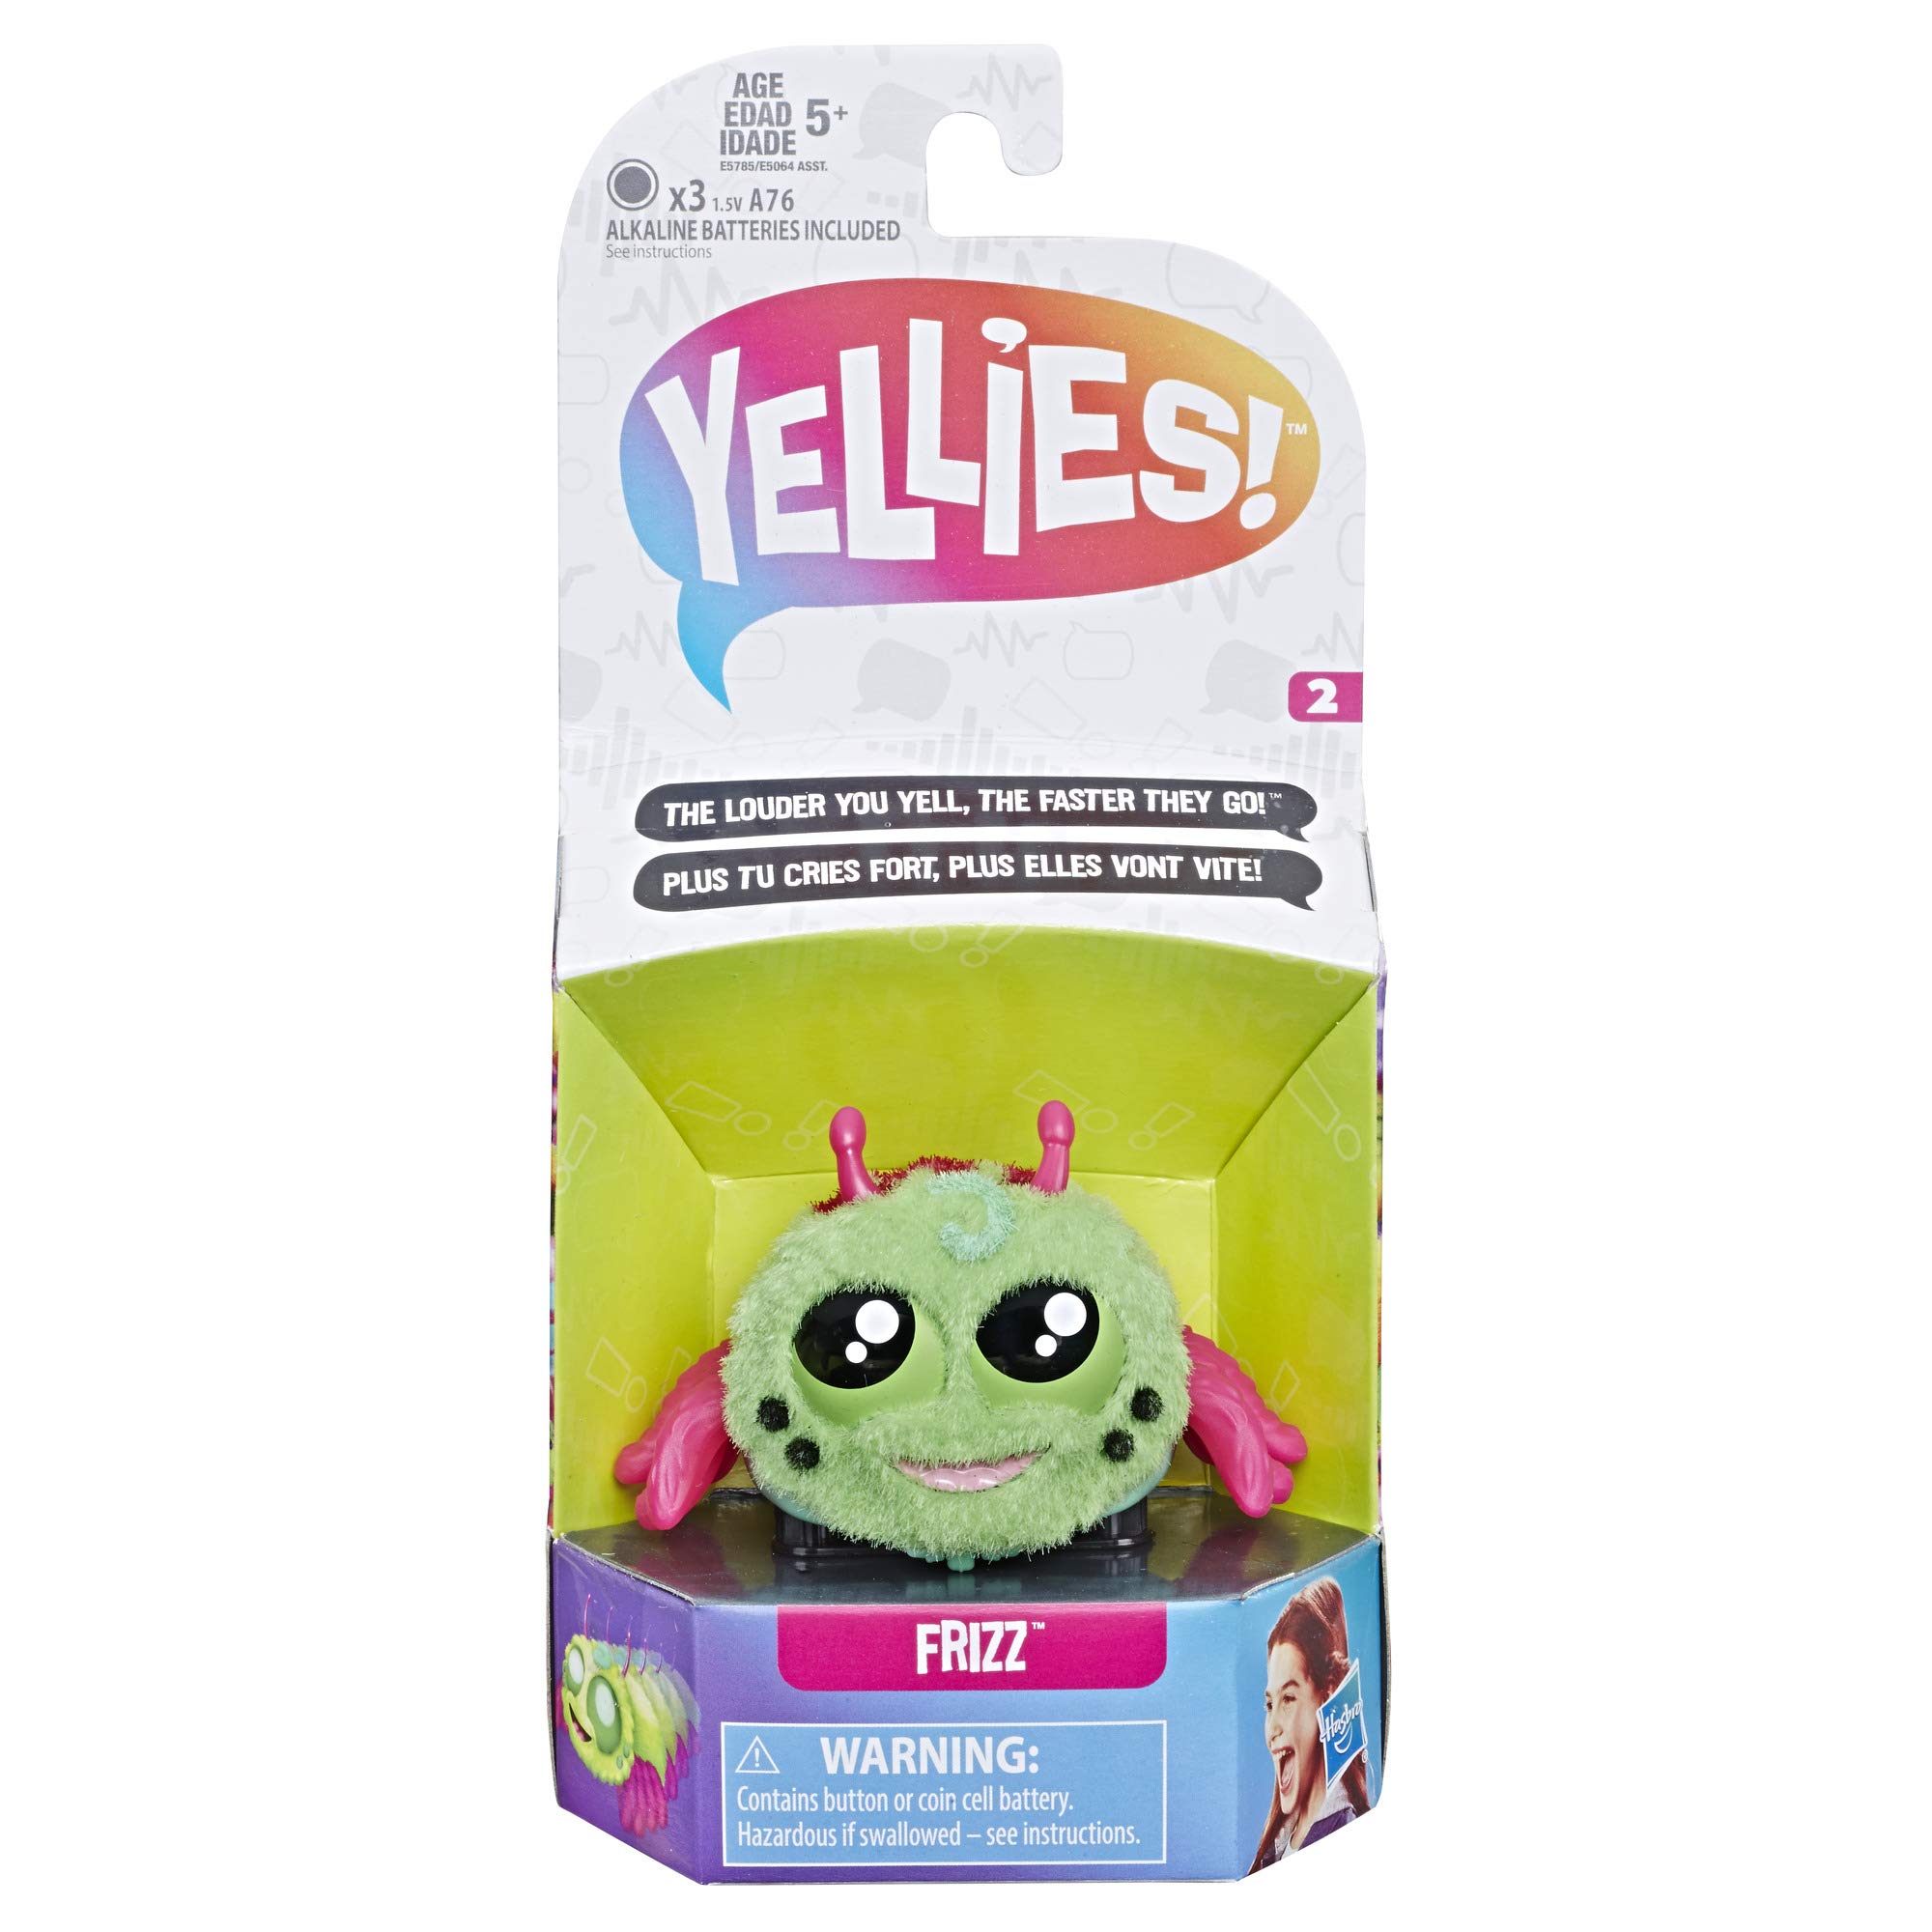 Hasbro Yellies! Frizz; Voice-Activated Spider Pet; Ages 5 & Up